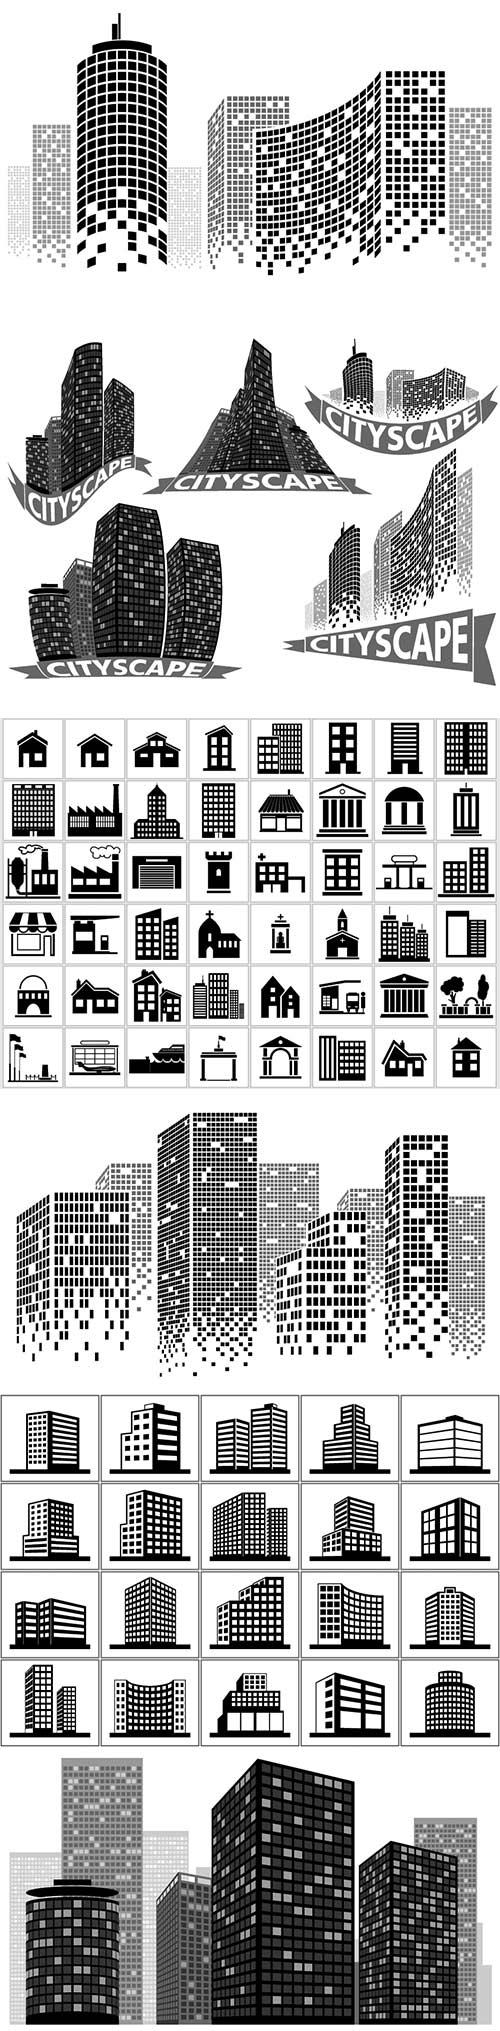 Cityscape set - buildings and city scene illustrations vector